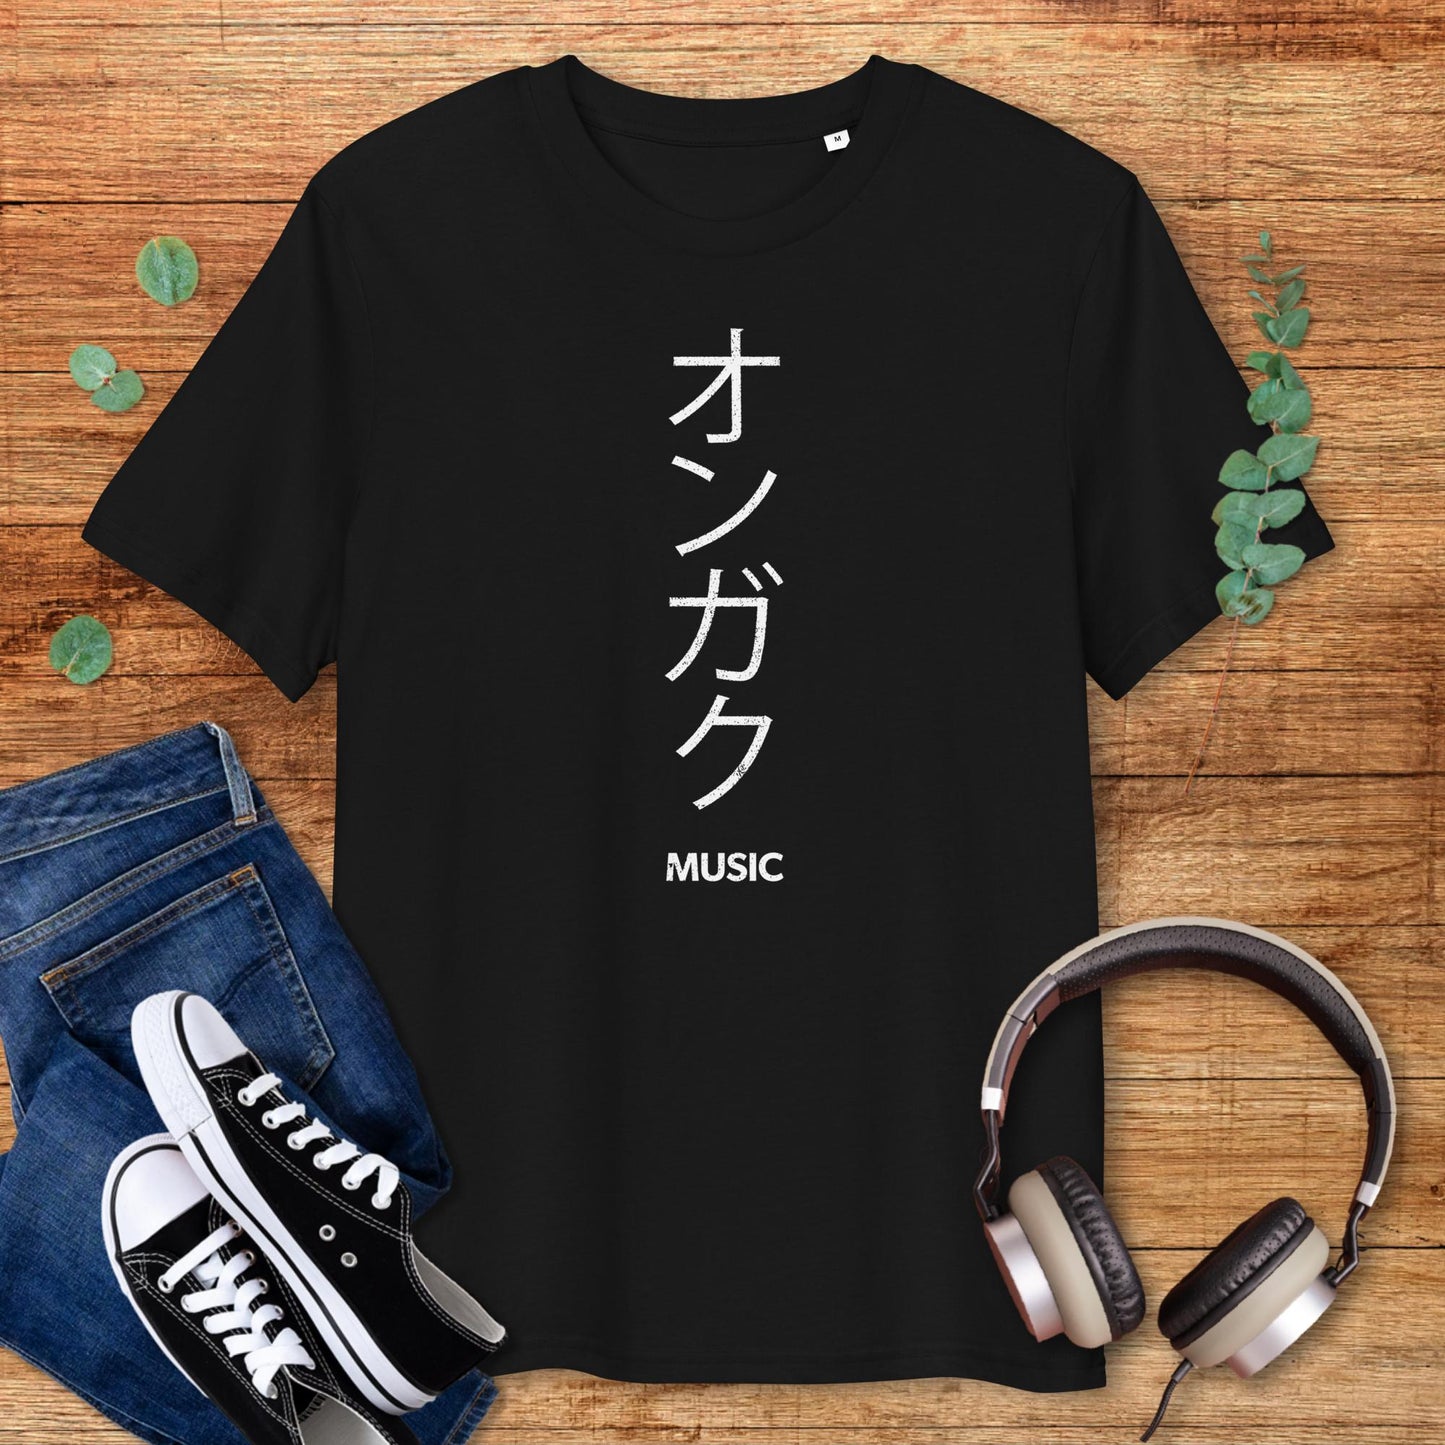 Music in Japanese